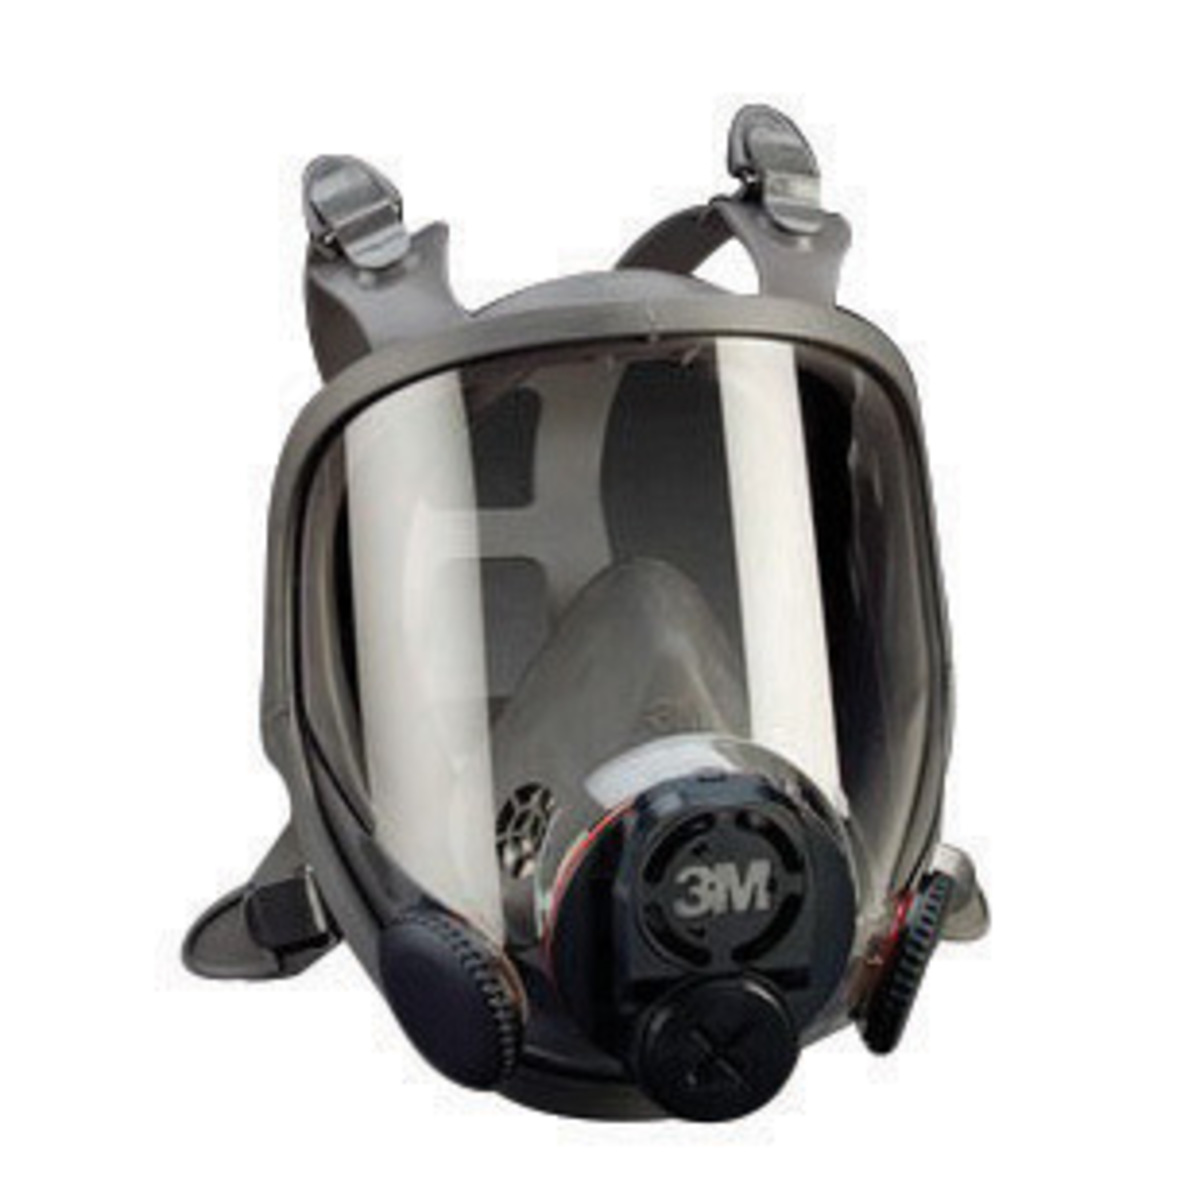 3M™ Small 6000 Series Full Face Air Purifying Respirator (Availability restrictions apply.)